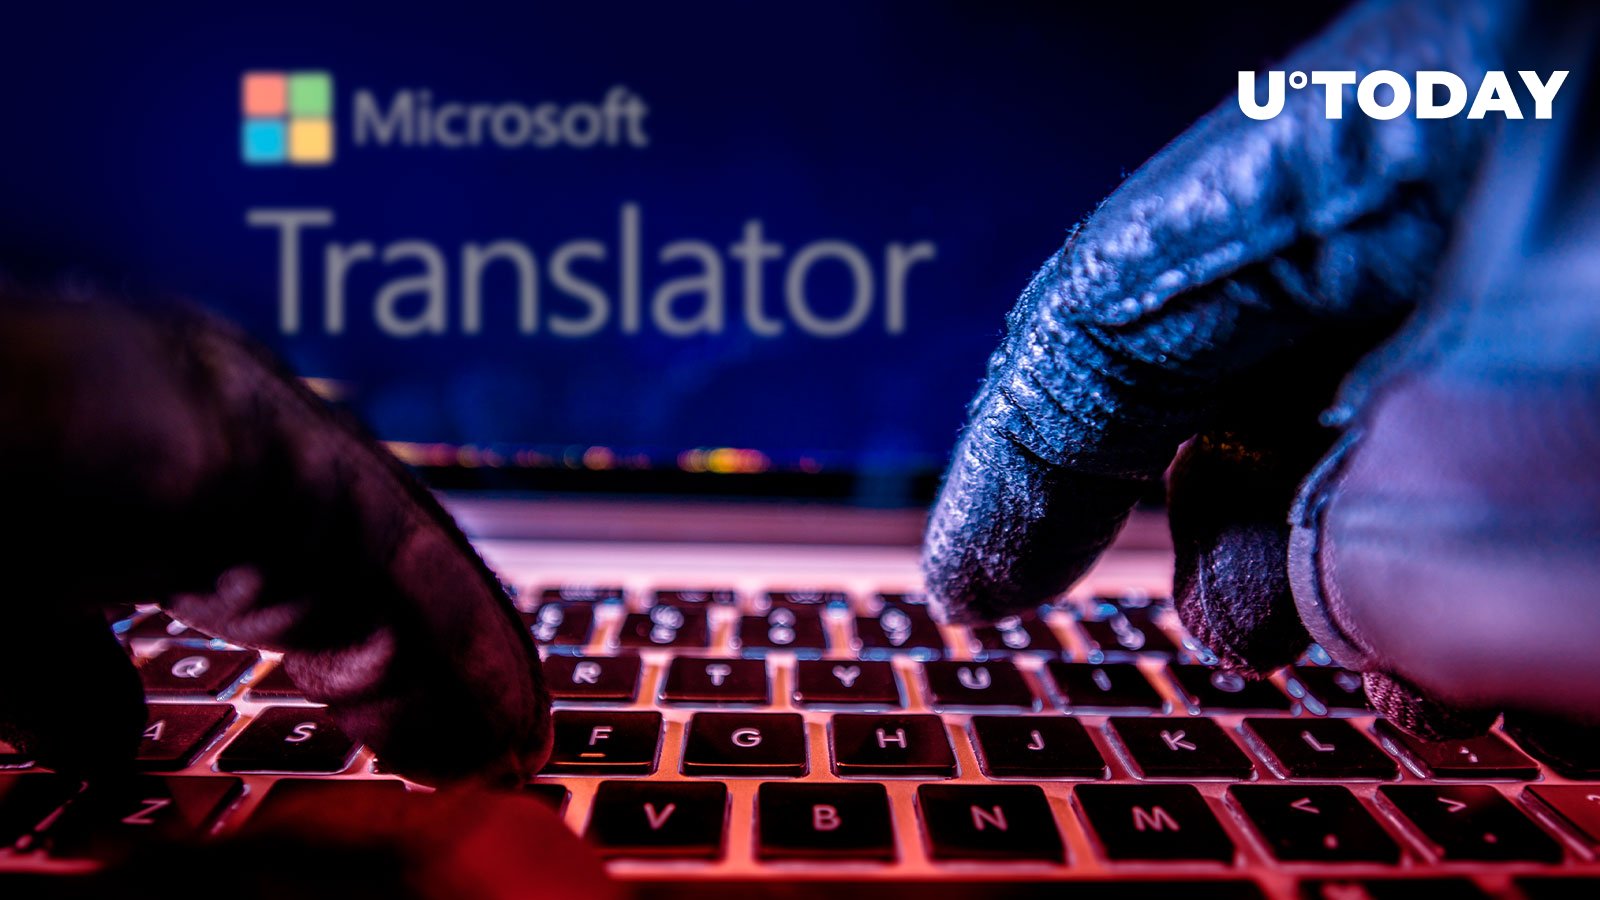 Crypto Mining Malware Masquerades as Microsoft Translate, Infects More Than 100,000 Users